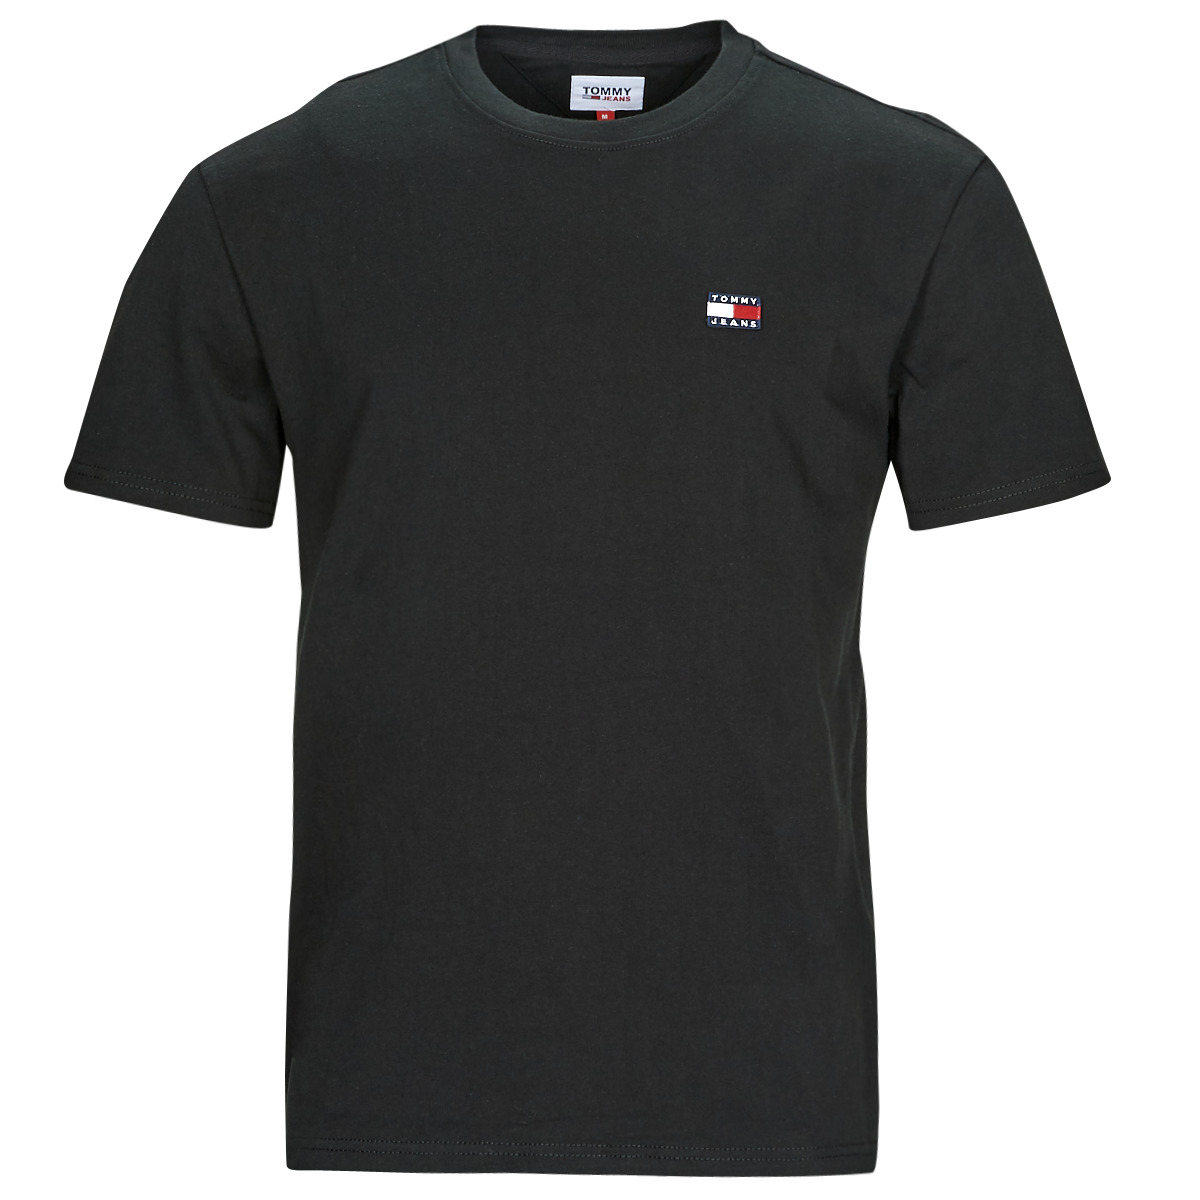 BADGE XS Spartoo - TJM Tommy - short-sleeved ! t-shirts | NET Clothing CLSC TOMMY Jeans TEE Men Black Free delivery